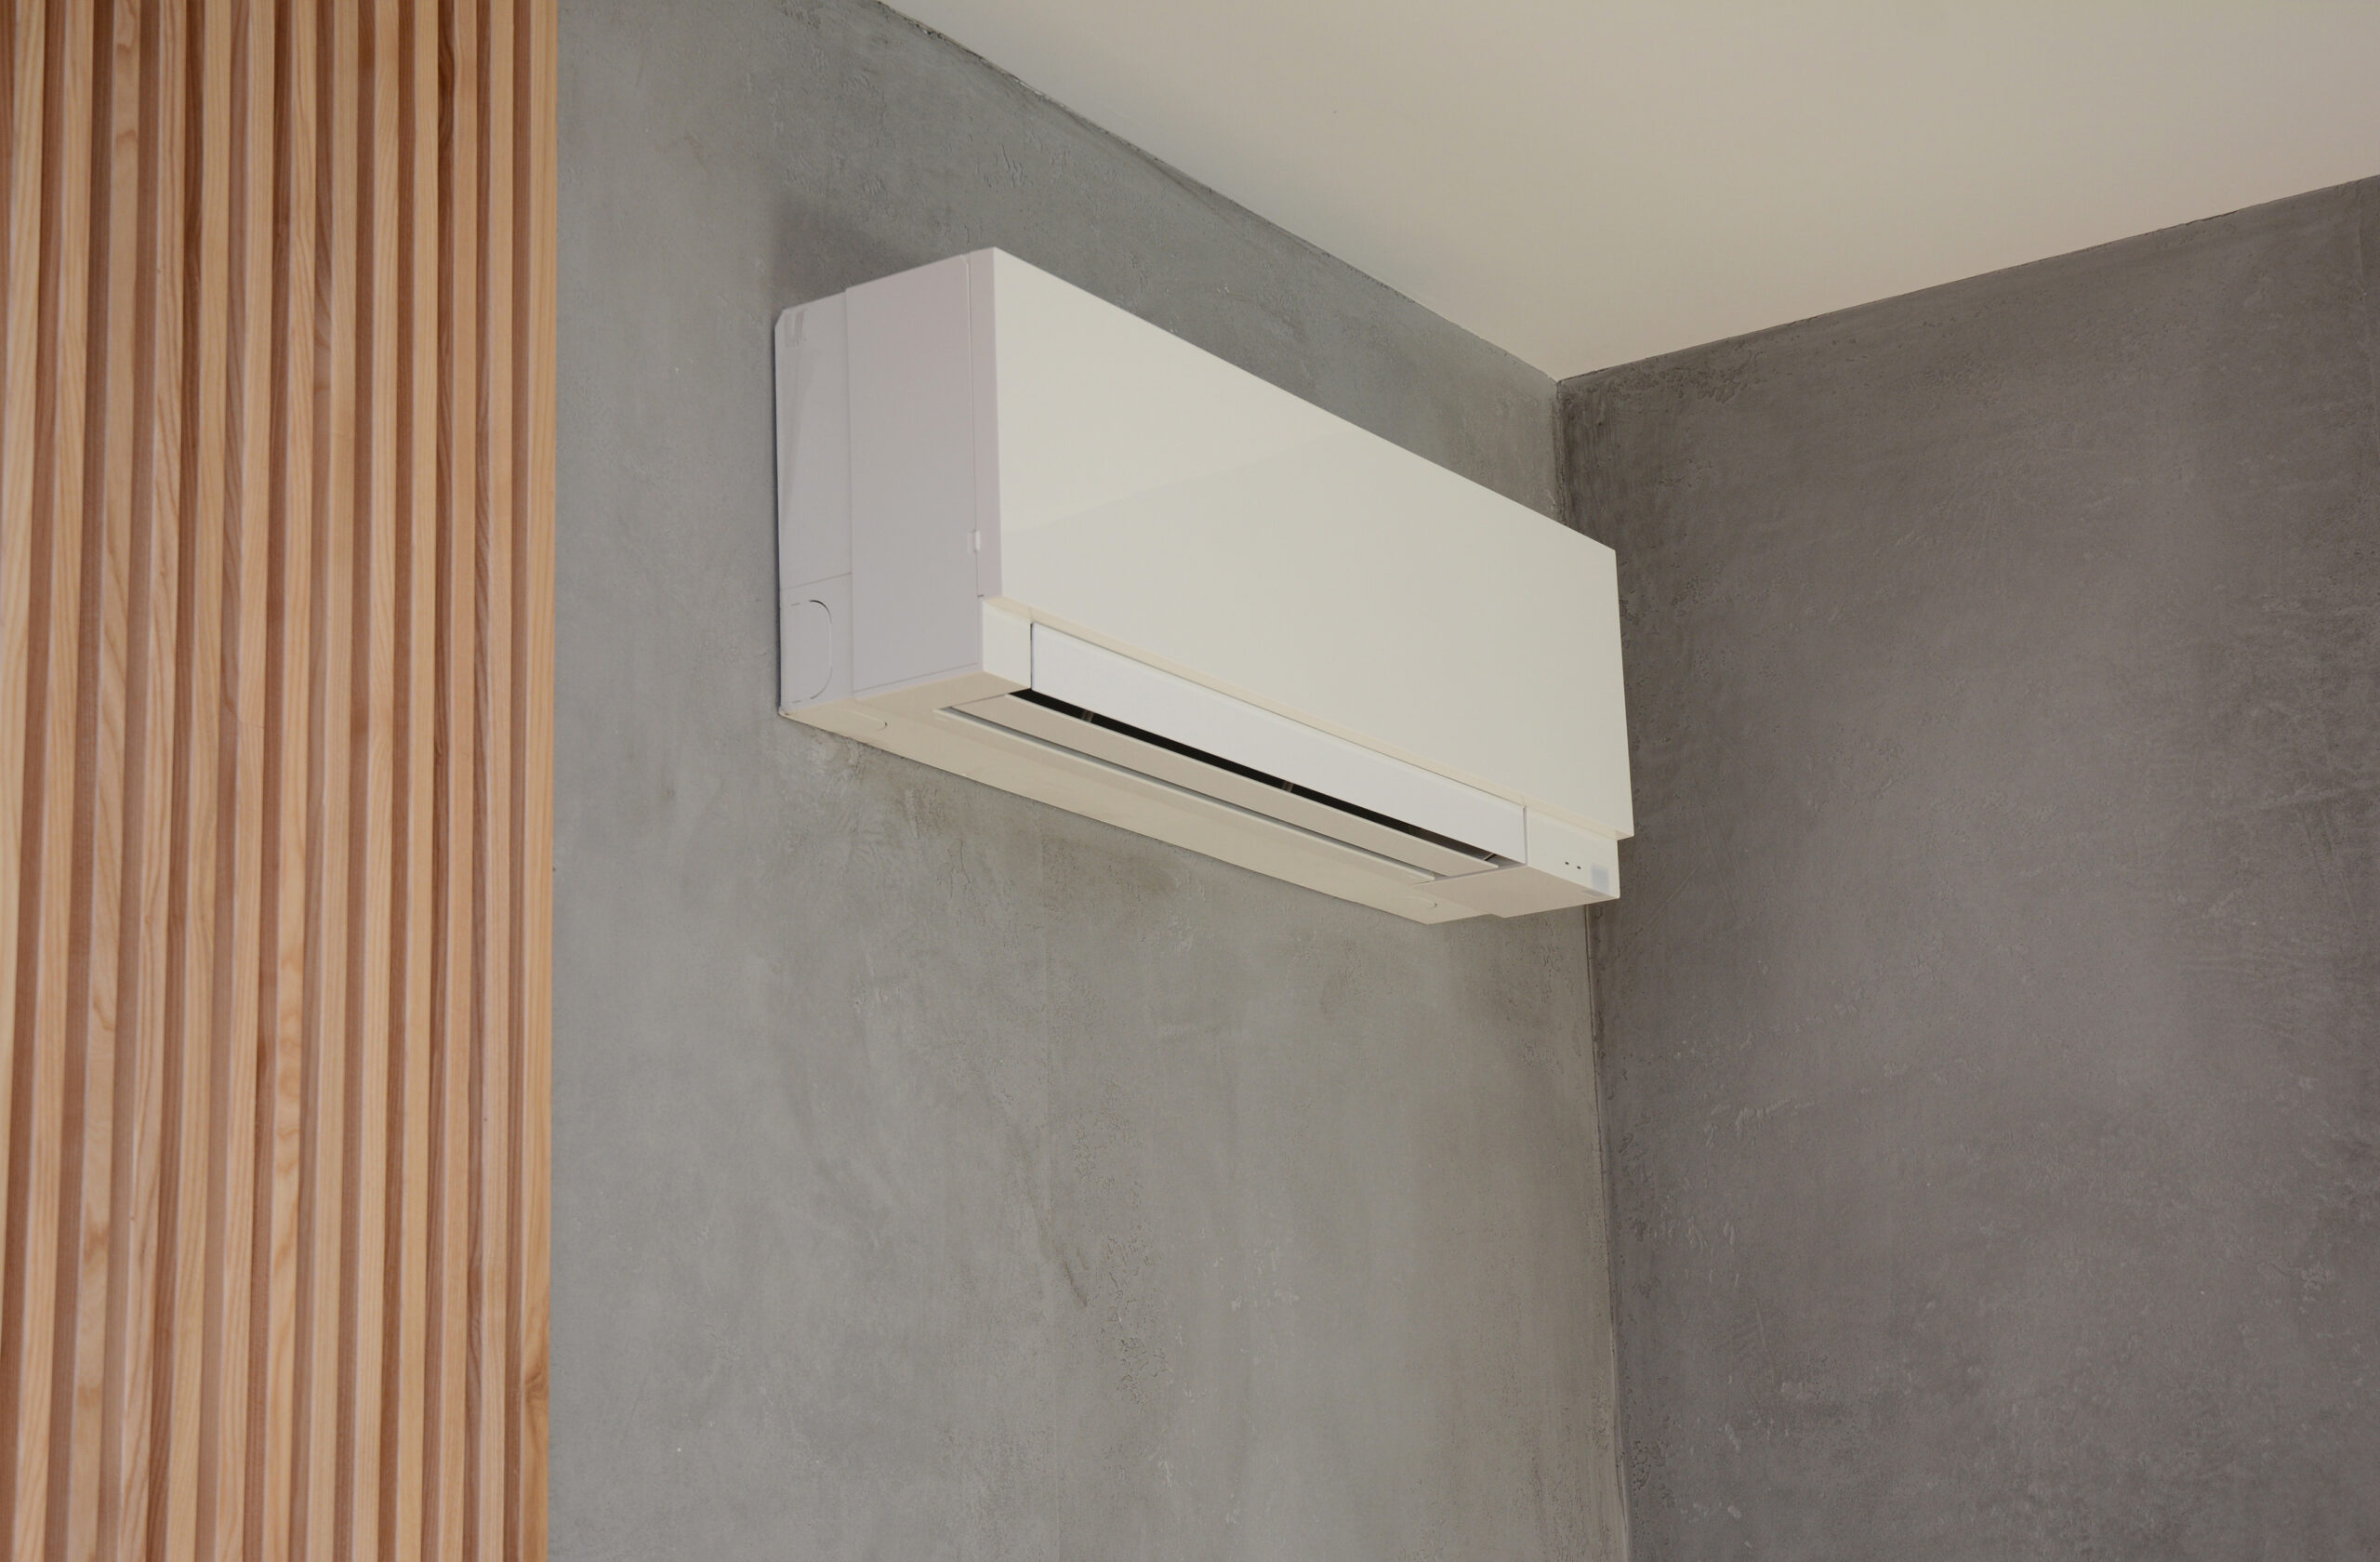 ductless mini split mounted on a wall